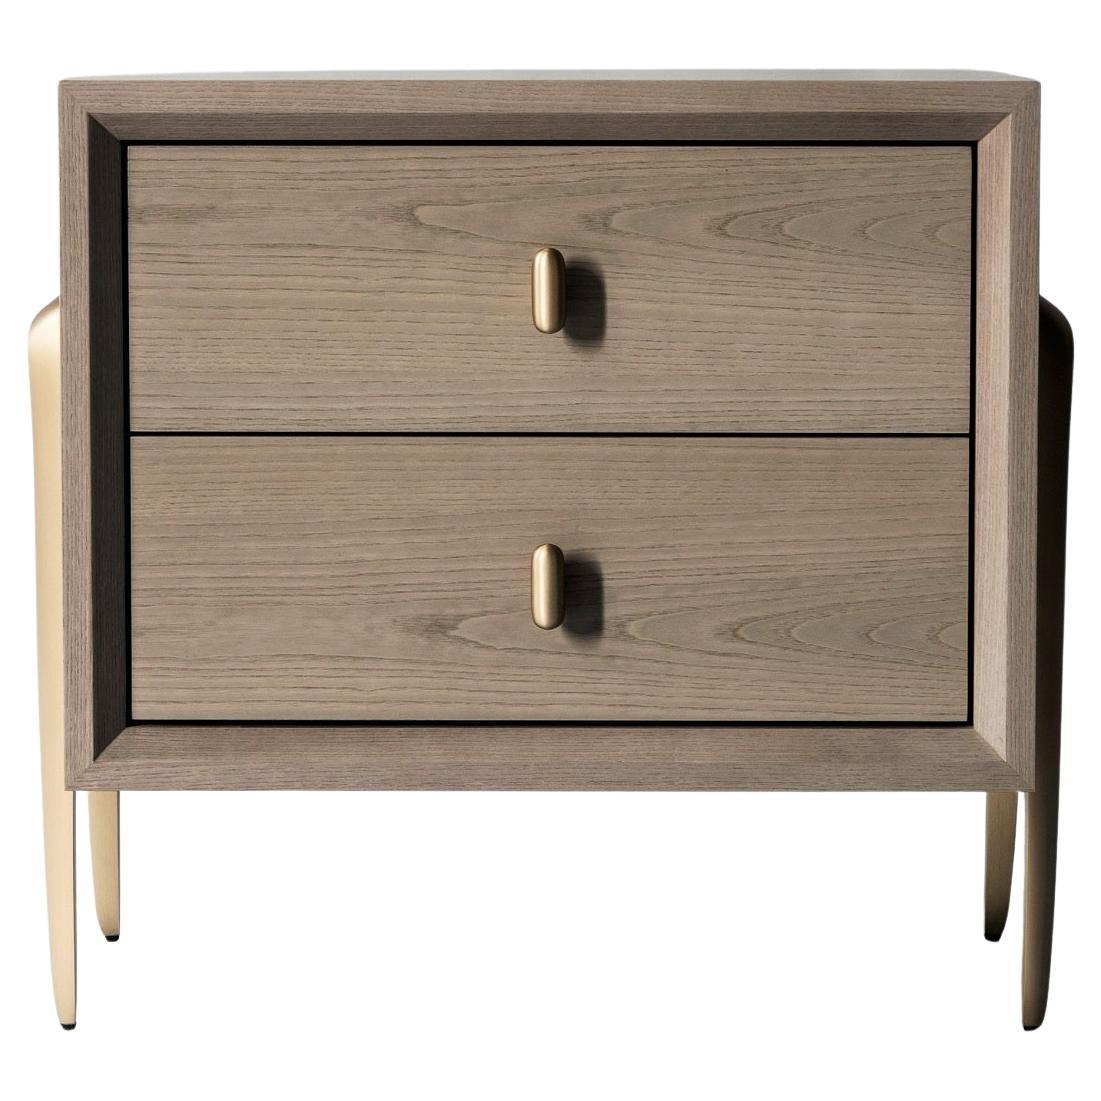 Serge Bedside Table by DeMuro Das with Solid Satin Bronze Legs